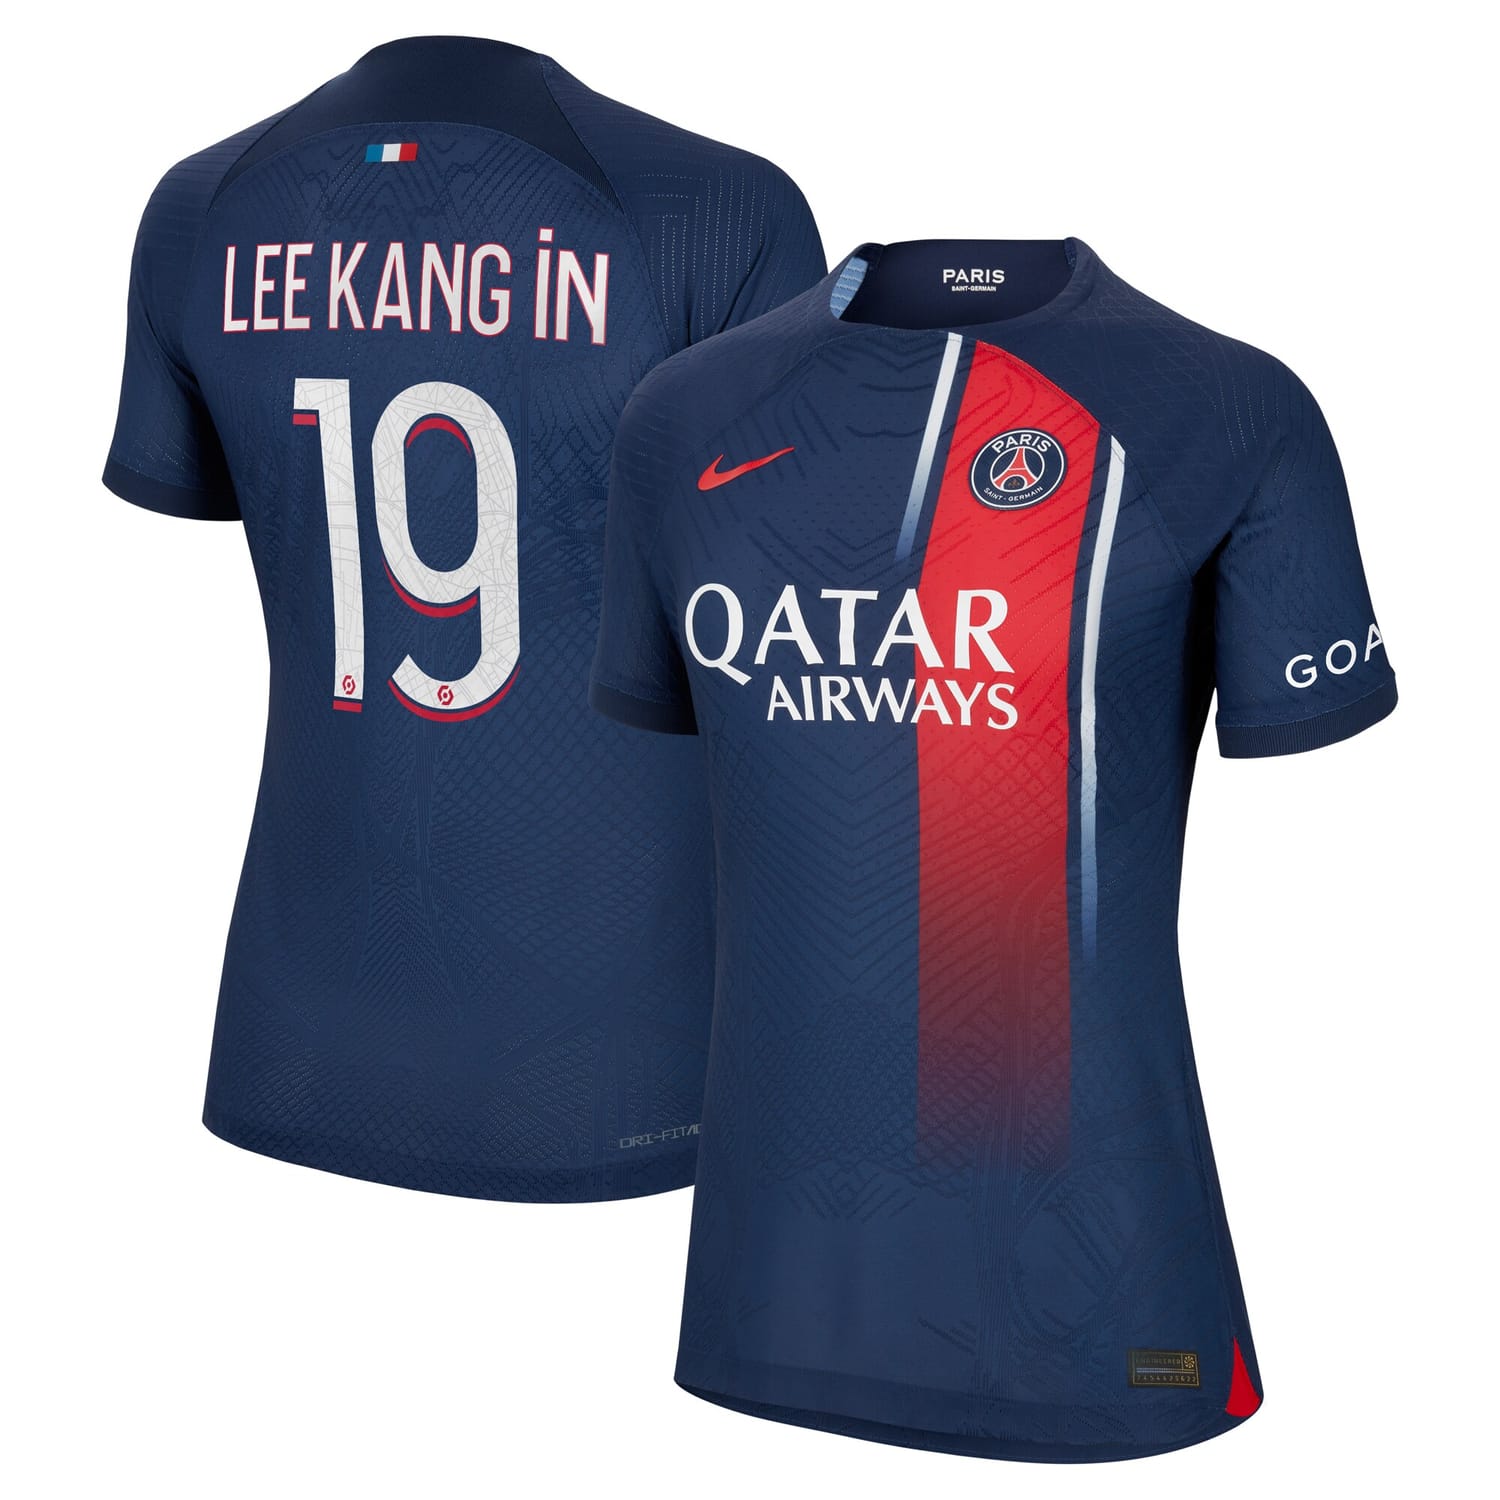 Ligue 1 Paris Saint-Germain Home Authentic Jersey Shirt 2023-24 player Lee Kang In 19 printing for Women